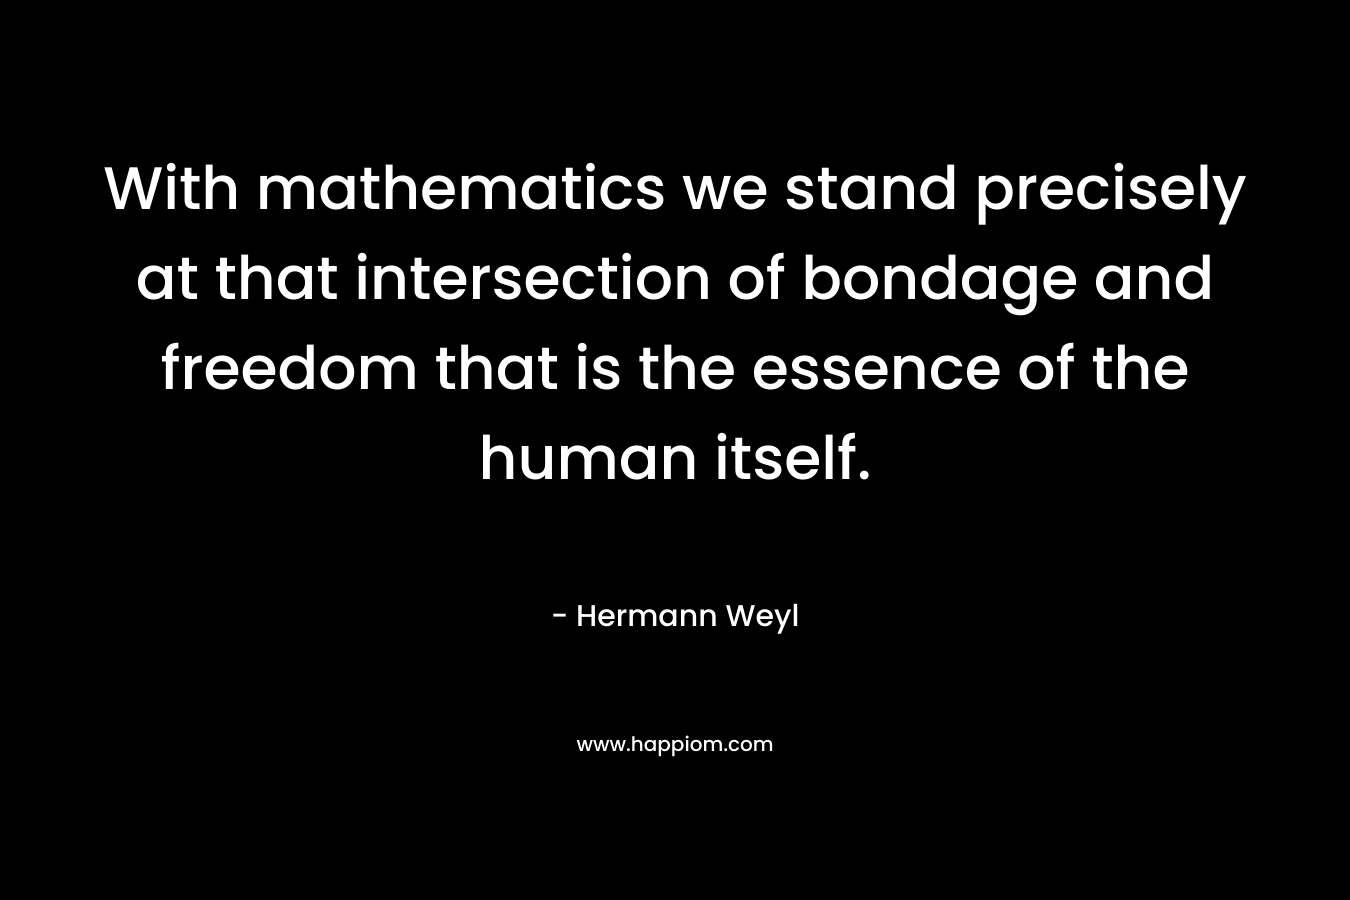 With mathematics we stand precisely at that intersection of bondage and freedom that is the essence of the human itself. – Hermann Weyl